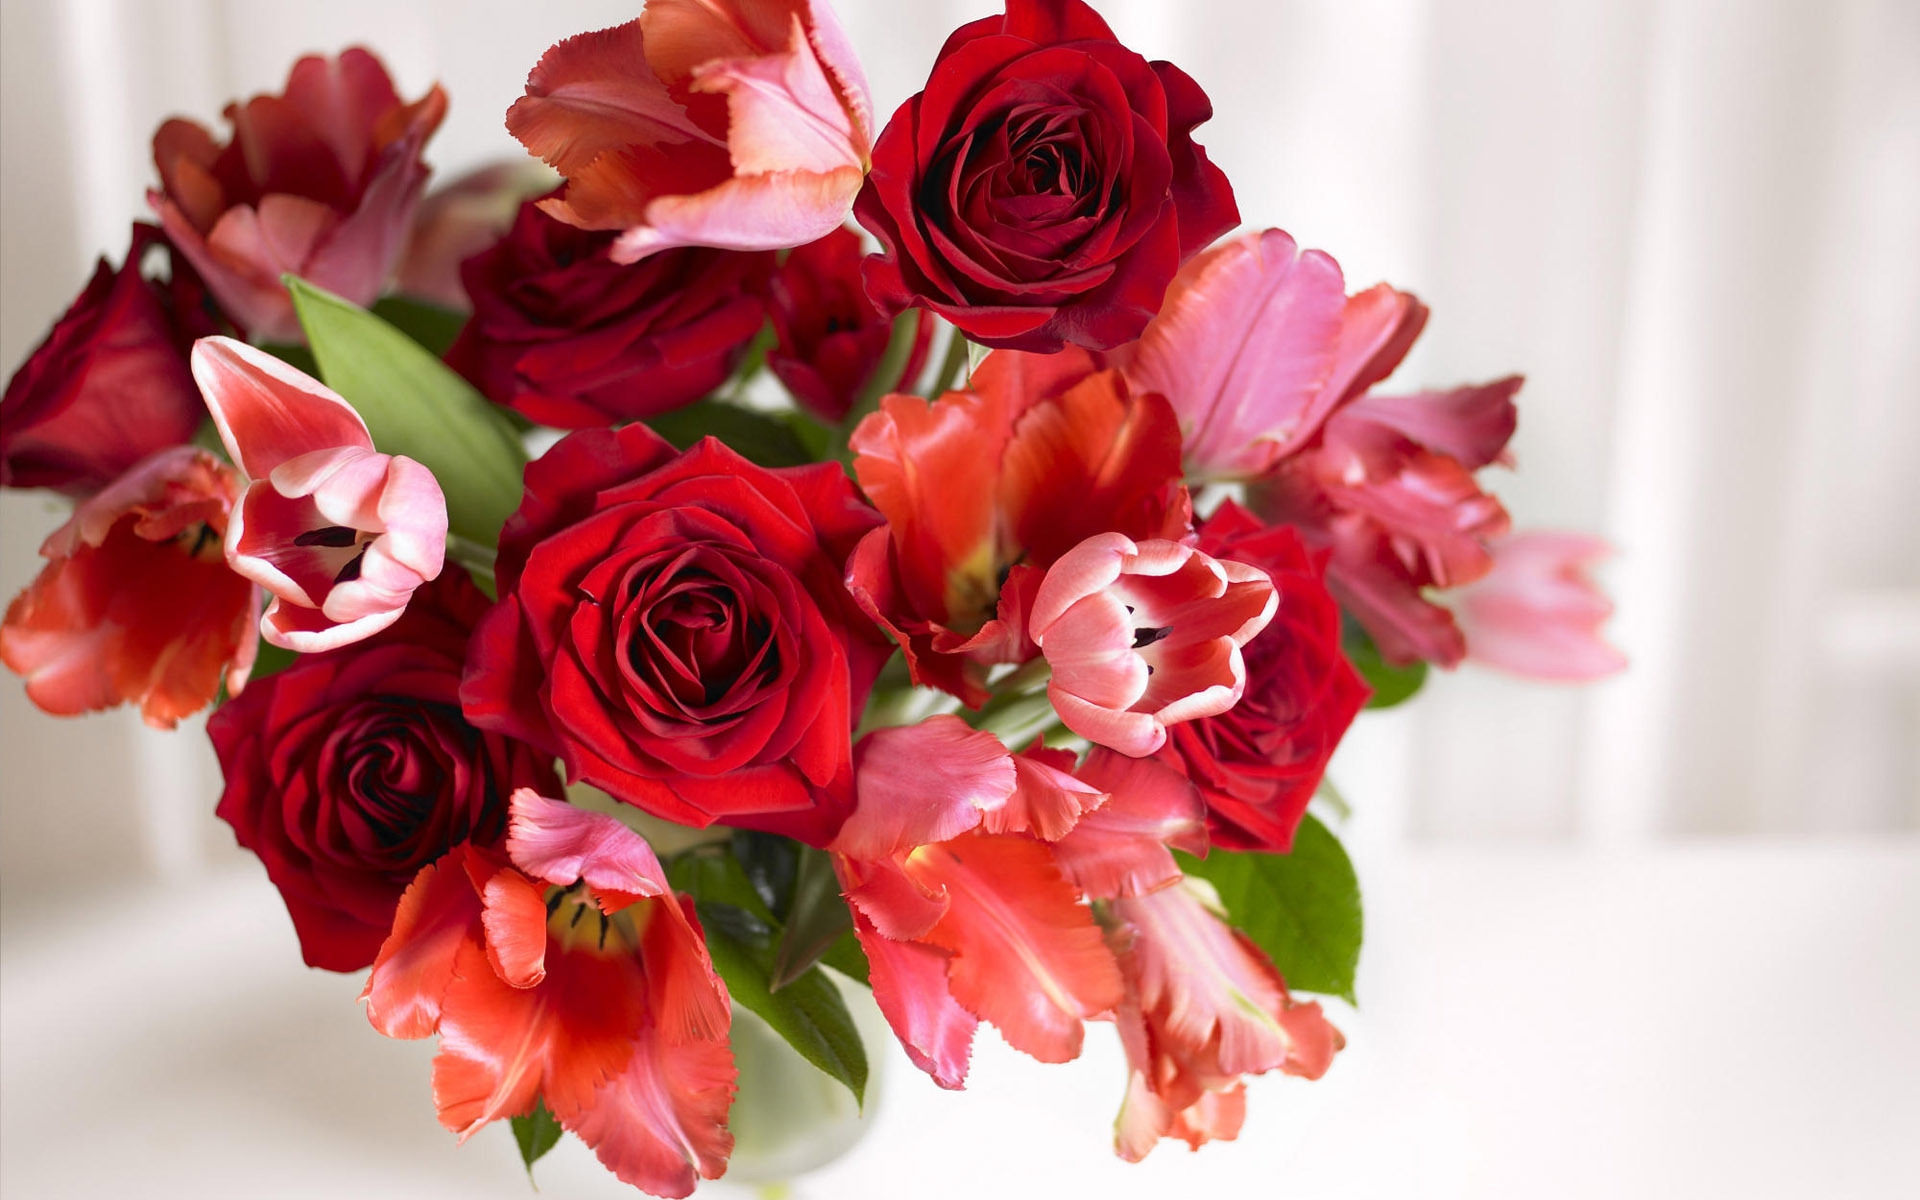 Arrangement of Roses and Tulips for 1920 x 1200 widescreen resolution